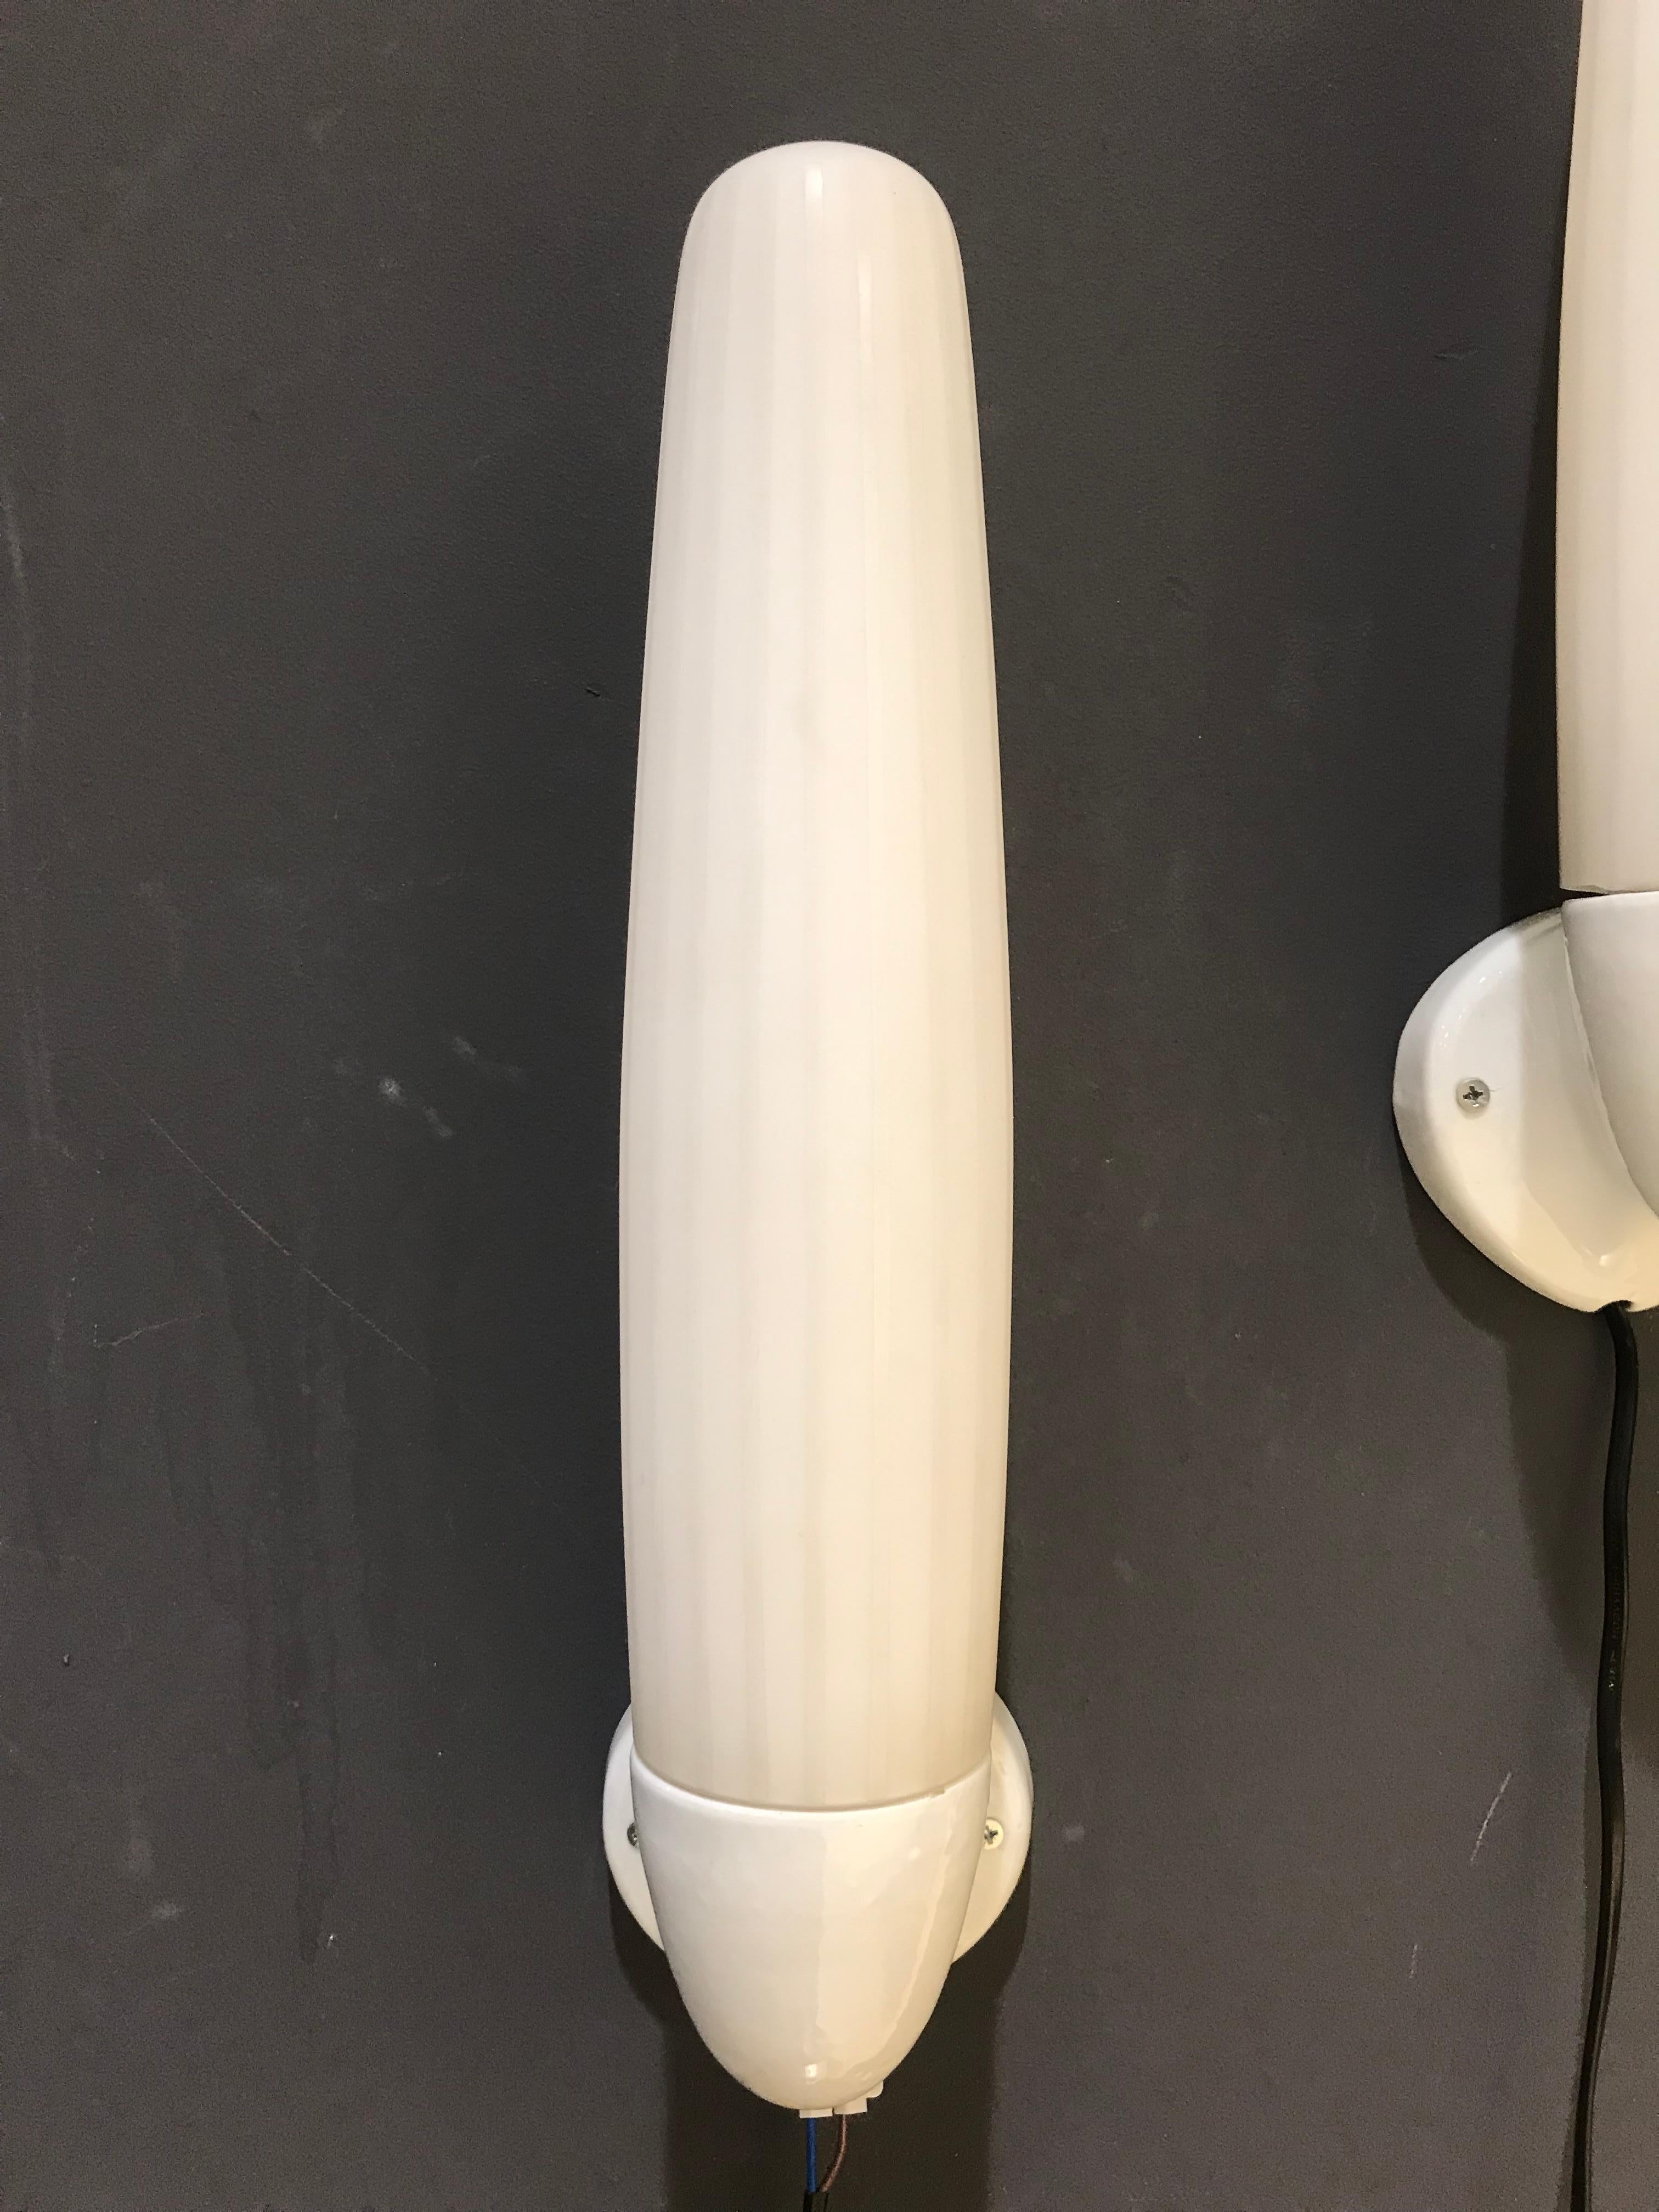 Set of 2 Large Vintage Wall Lamps by Wilhelm Wagenfeld for Lindner, 1960s In Good Condition For Sale In Eindhoven, Netherlands